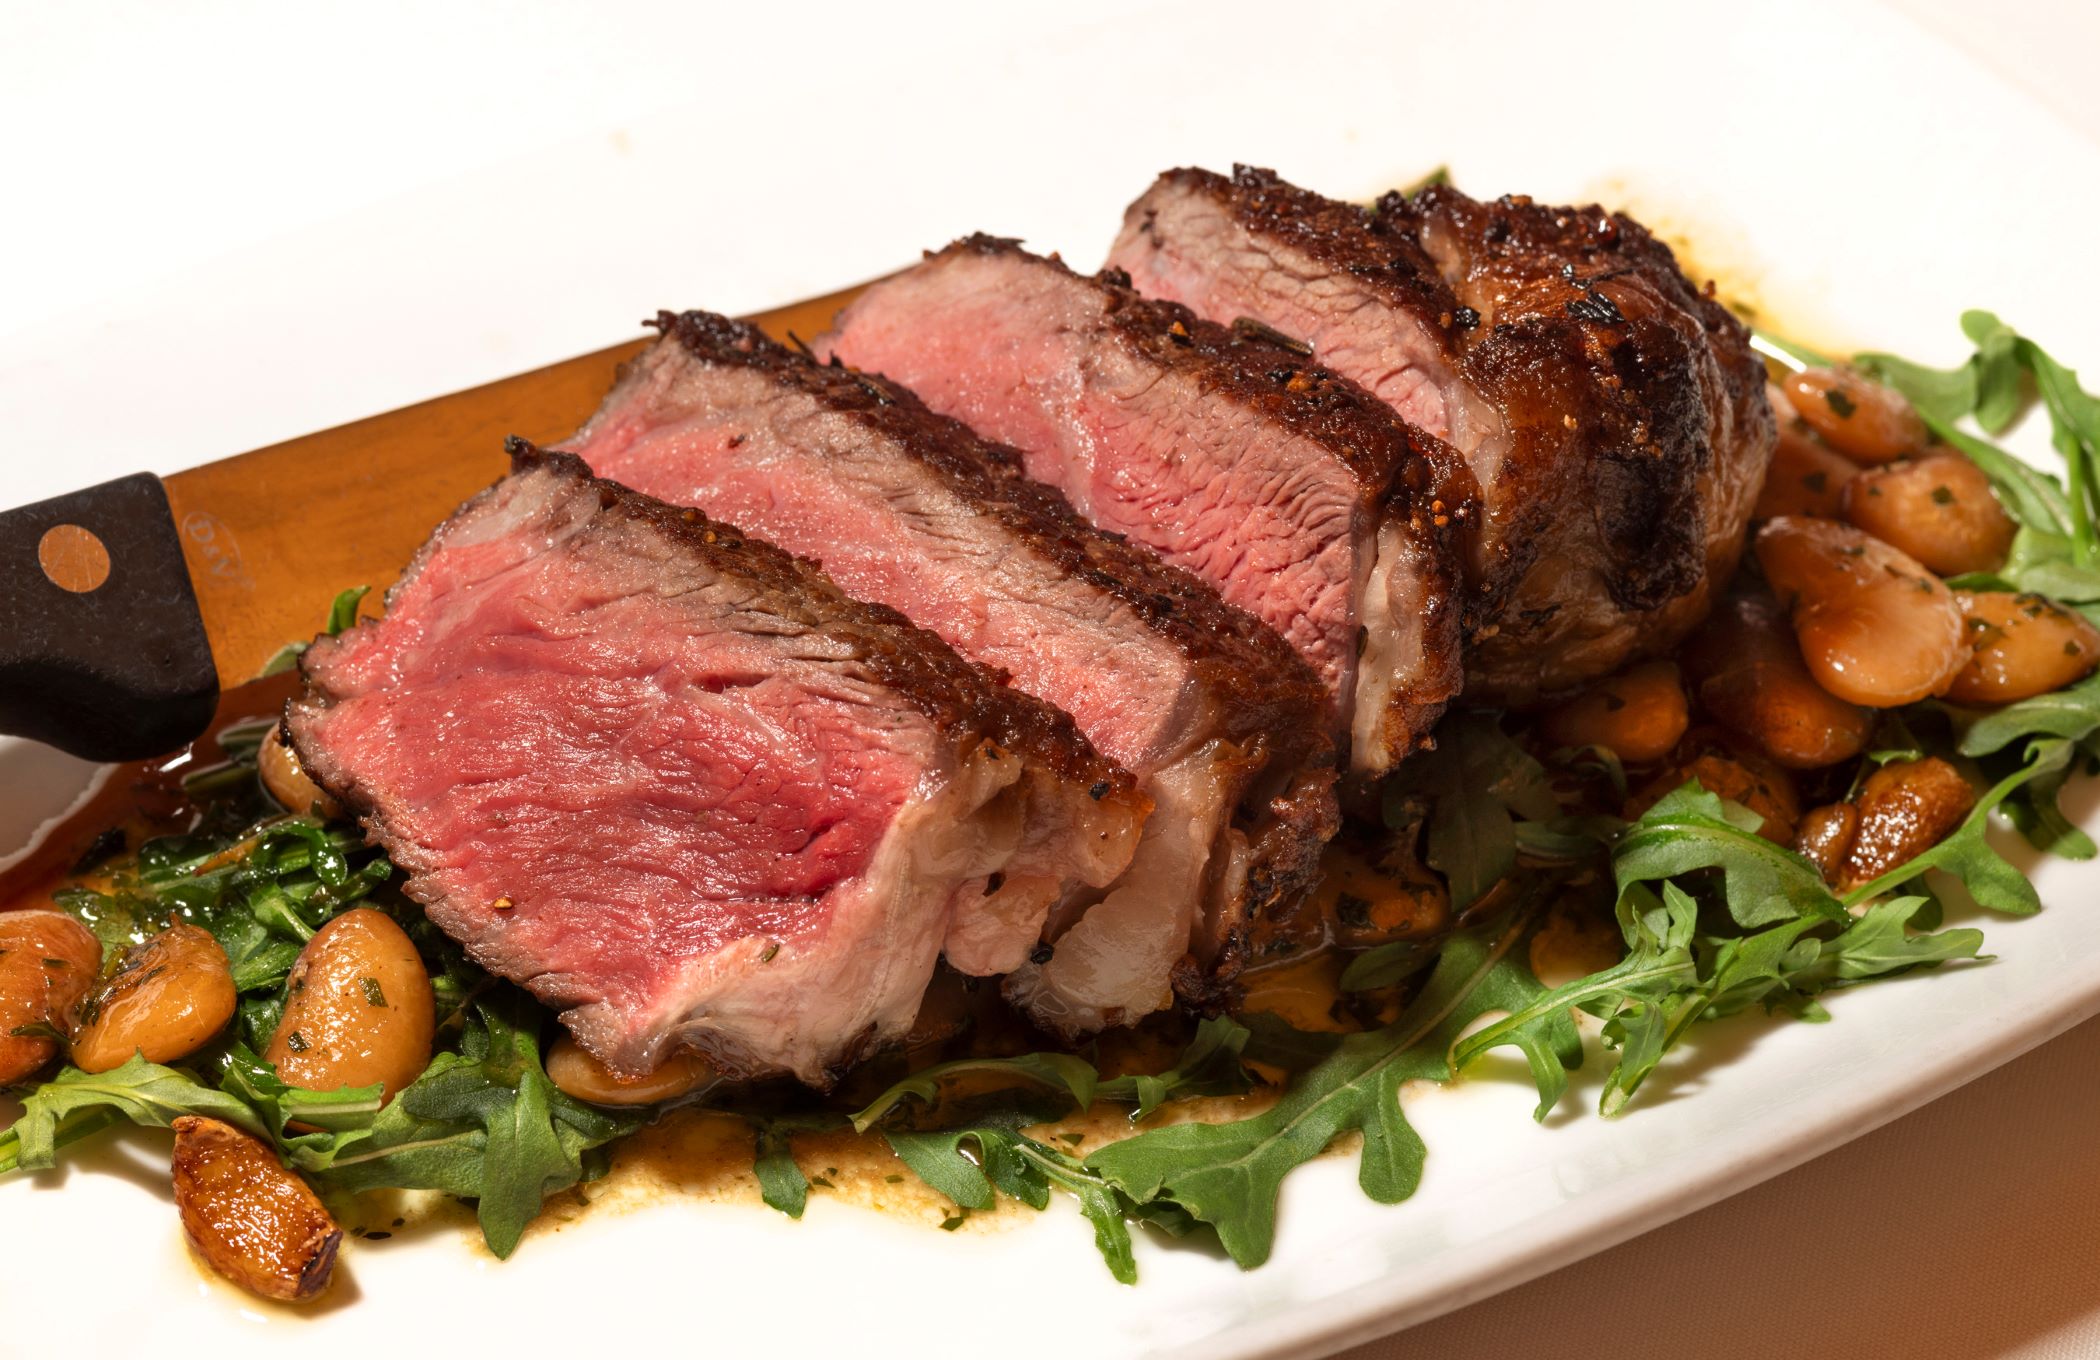 An image of the Roasted Rib Eye from Jar.